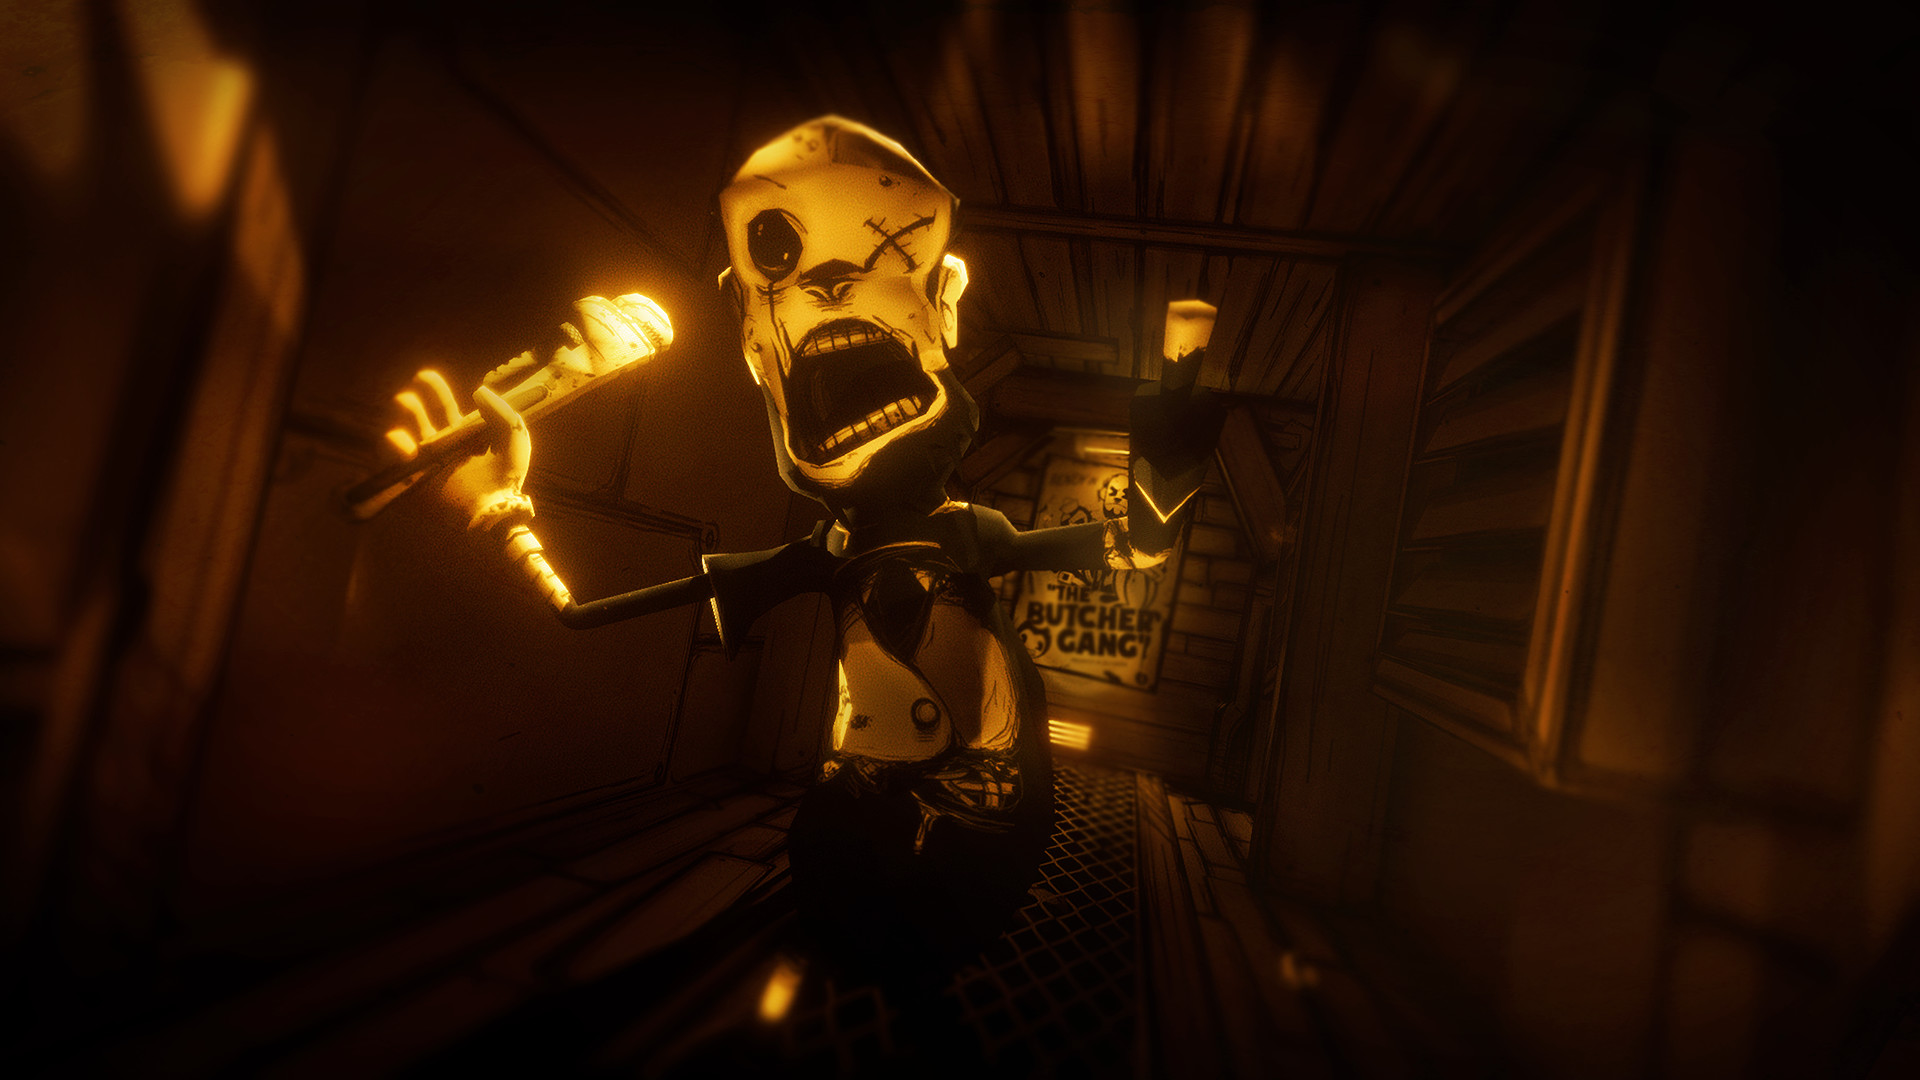 Bendy and the Ink Machine Cheats & Trainers for PC